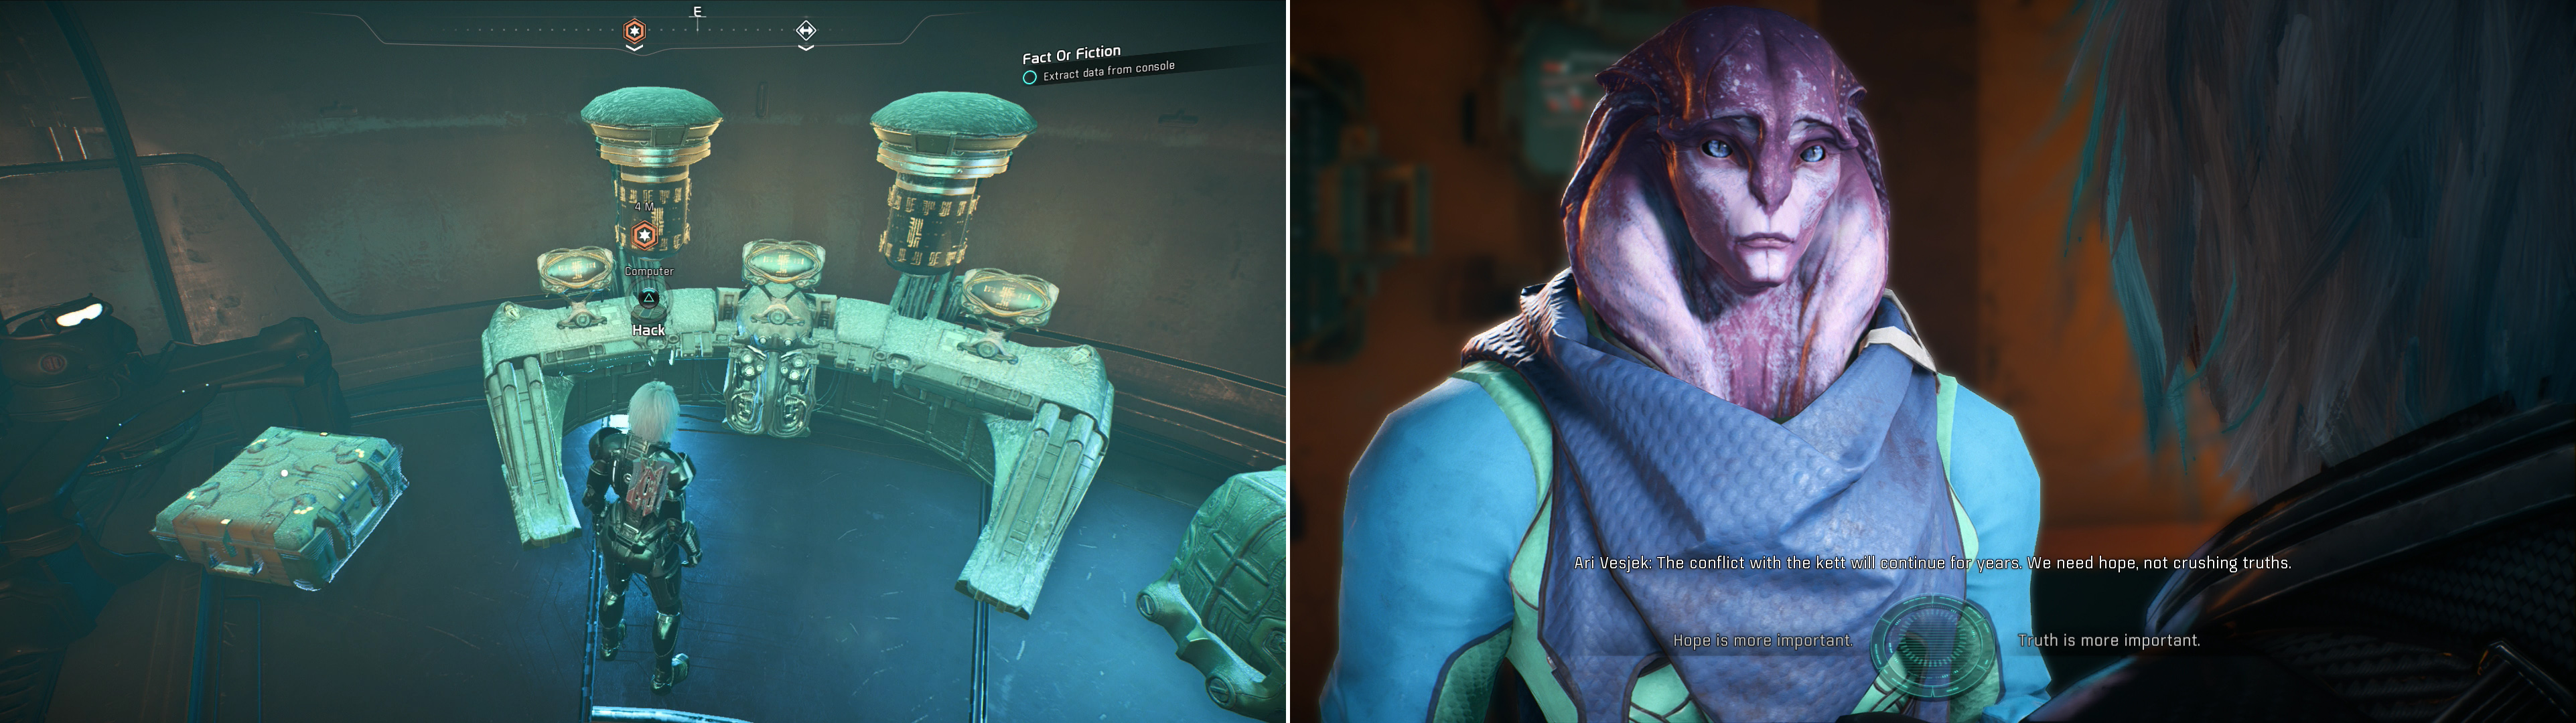 Extract data from the console (left) then return with the information Ari Vesjek request and help him determine how to handle the unwelcome truths they reveal (right).